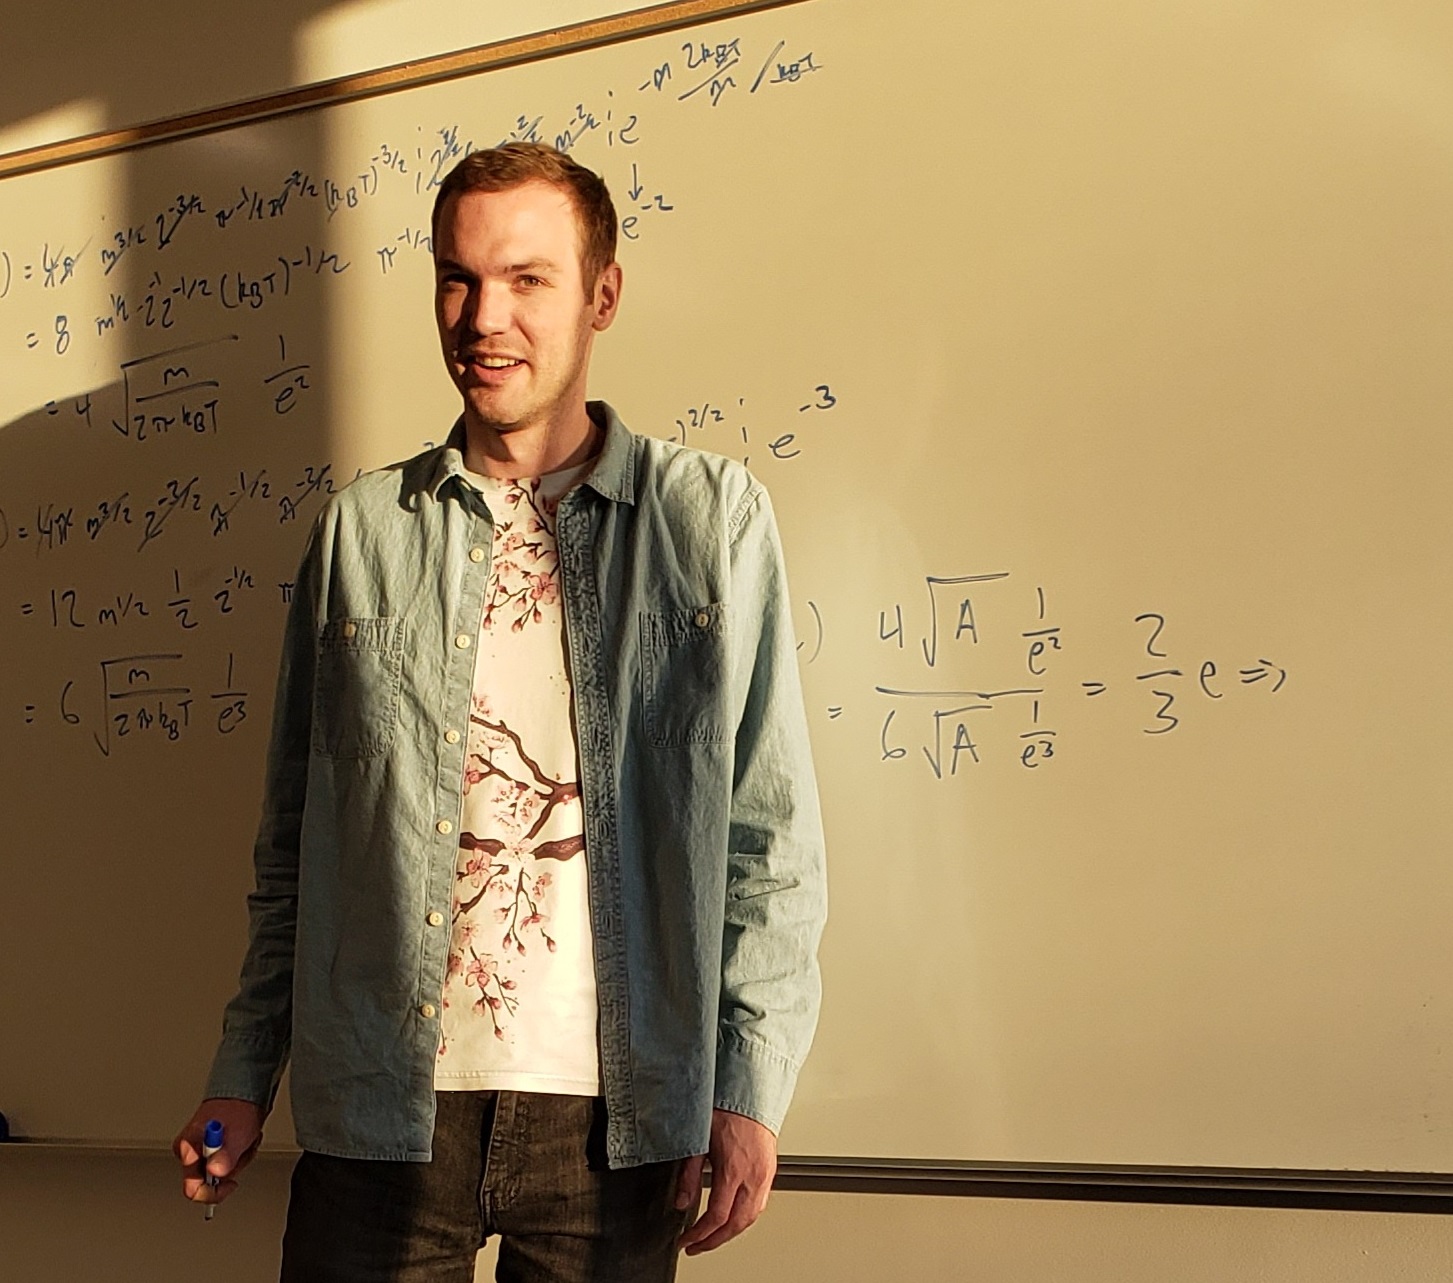 Image of Henry Mills at a whiteboard with equations